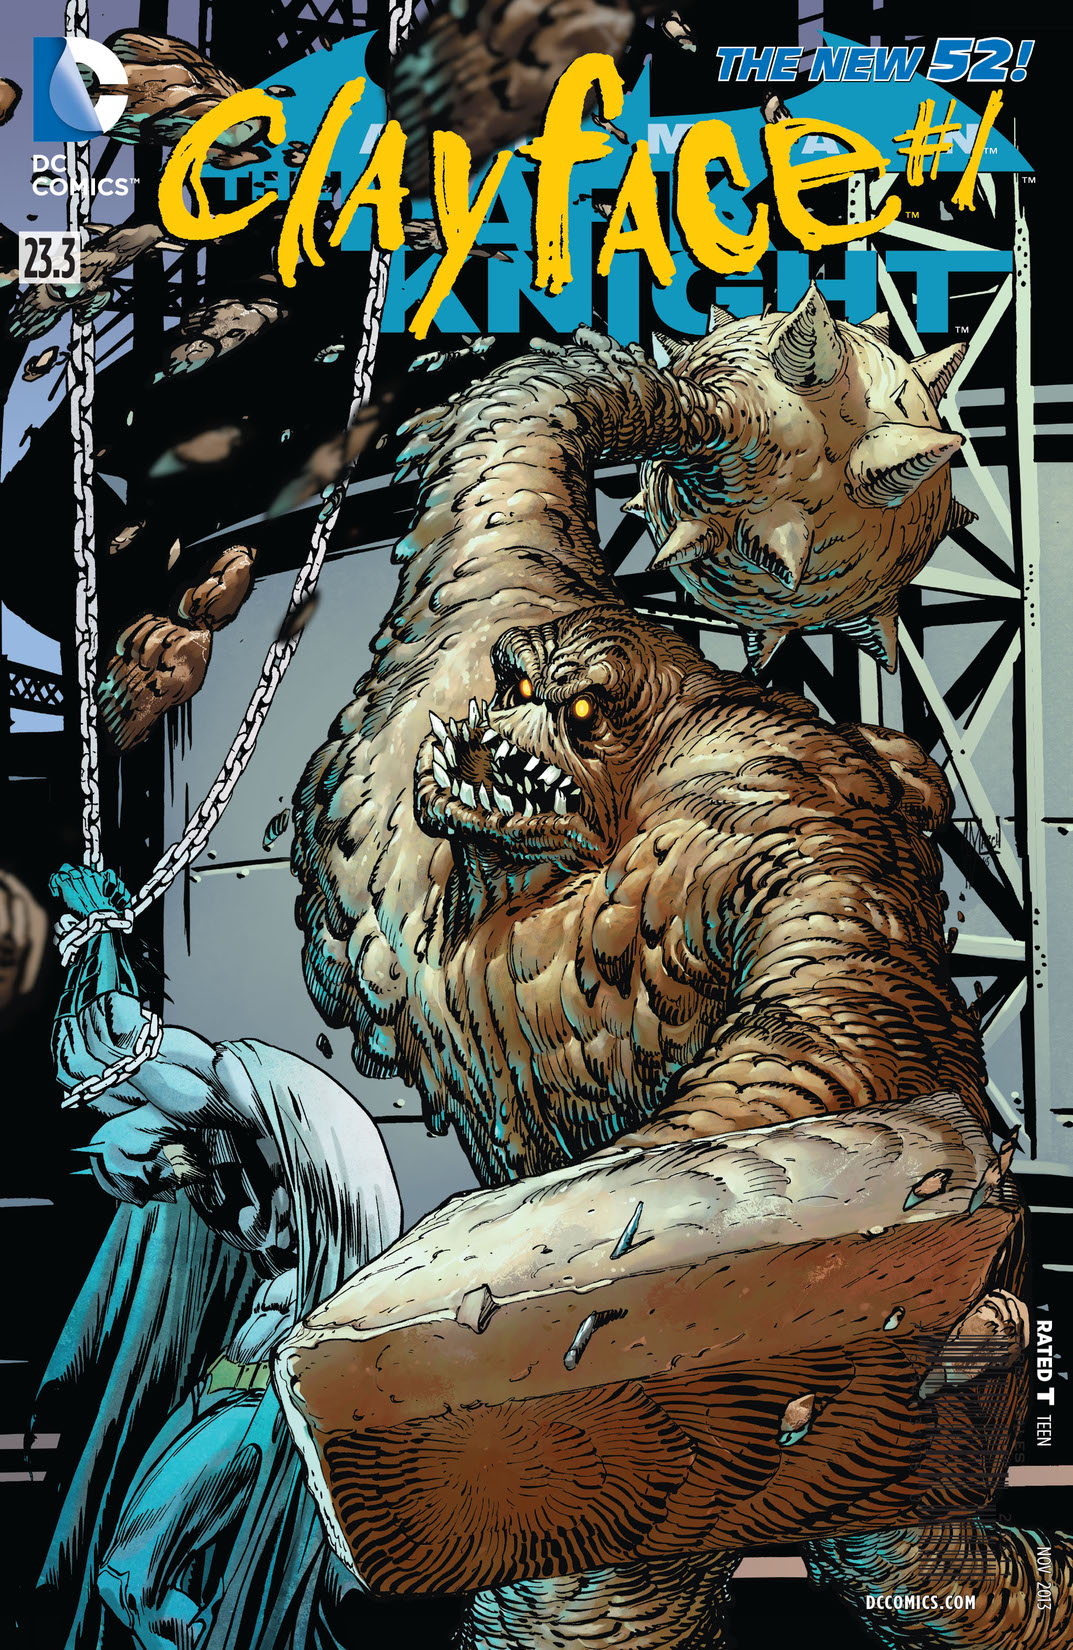 Batman: The Dark Knight feat Clayface (2013-) #23.3 preview images